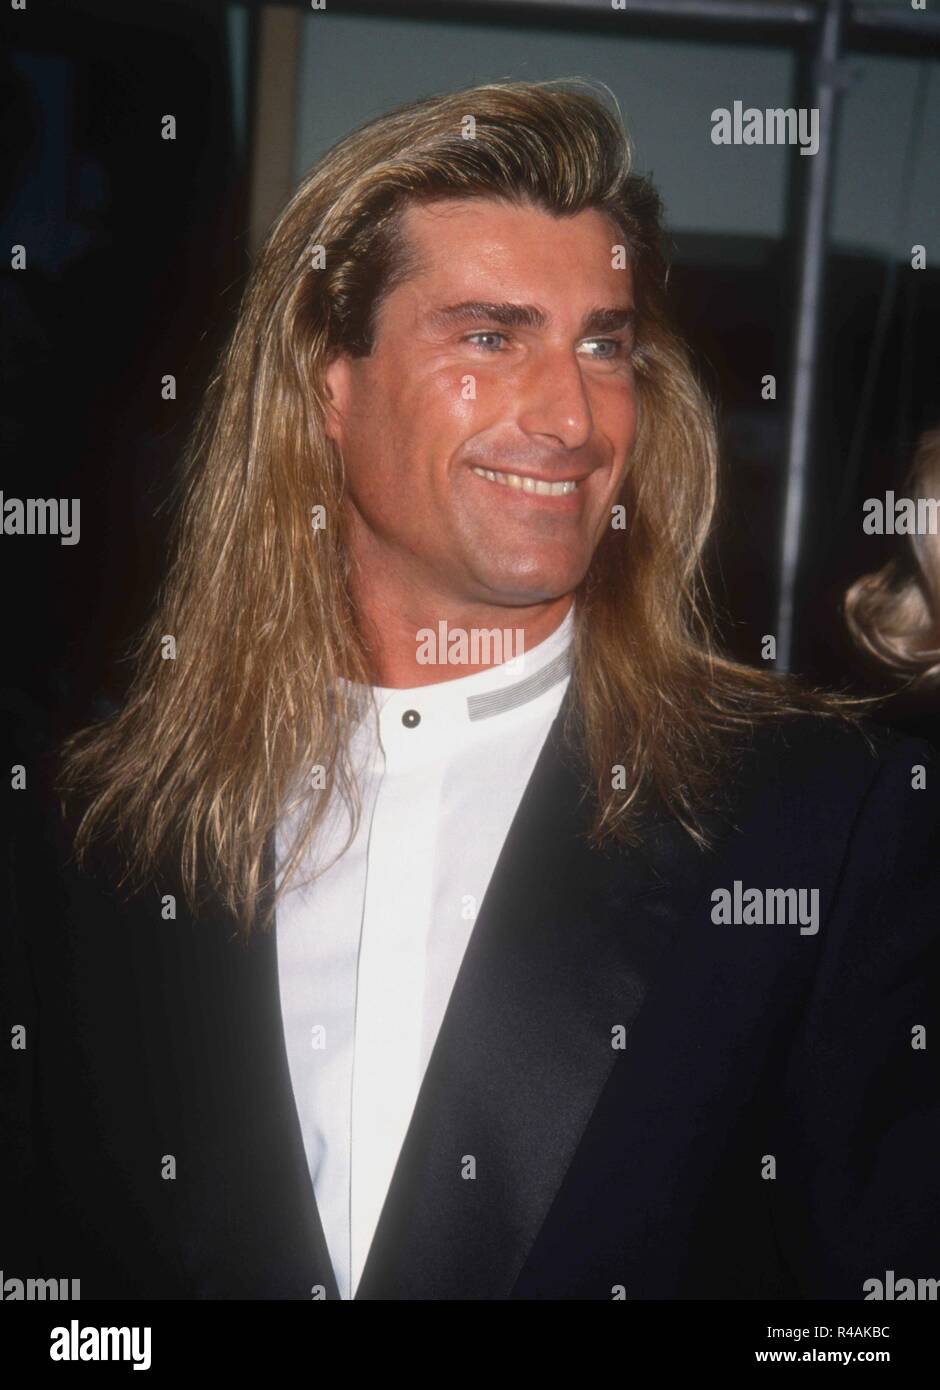 BEVERLY HILLS, CA - FEBRUARY 26: Model Fabio attends the Ninth Annual Soap Opera Digest Awards on February 26, 1993 at the Beverly Hilton Hotel in Beverly Hills, California. Photo by Barry King/Alamy Stock Photo Stock Photo